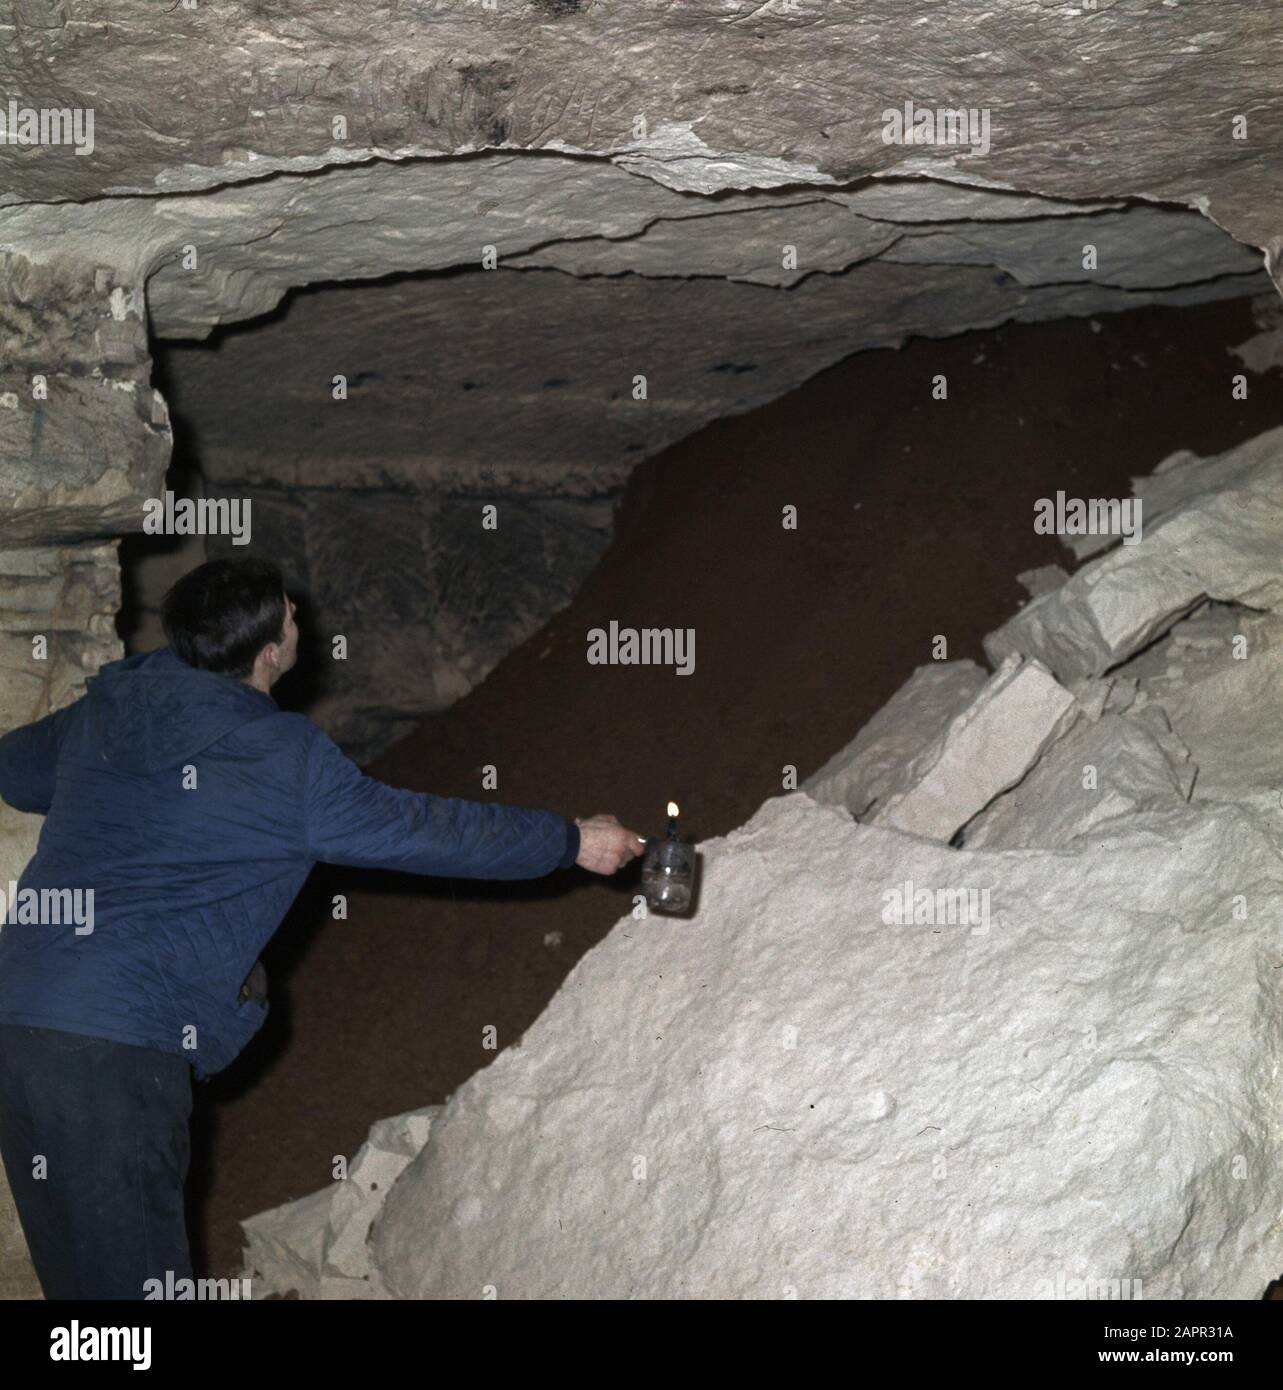 caves, collapses Date: undated Keywords: caves, collapses Institution name: diapositive 6x6 color Stock Photo